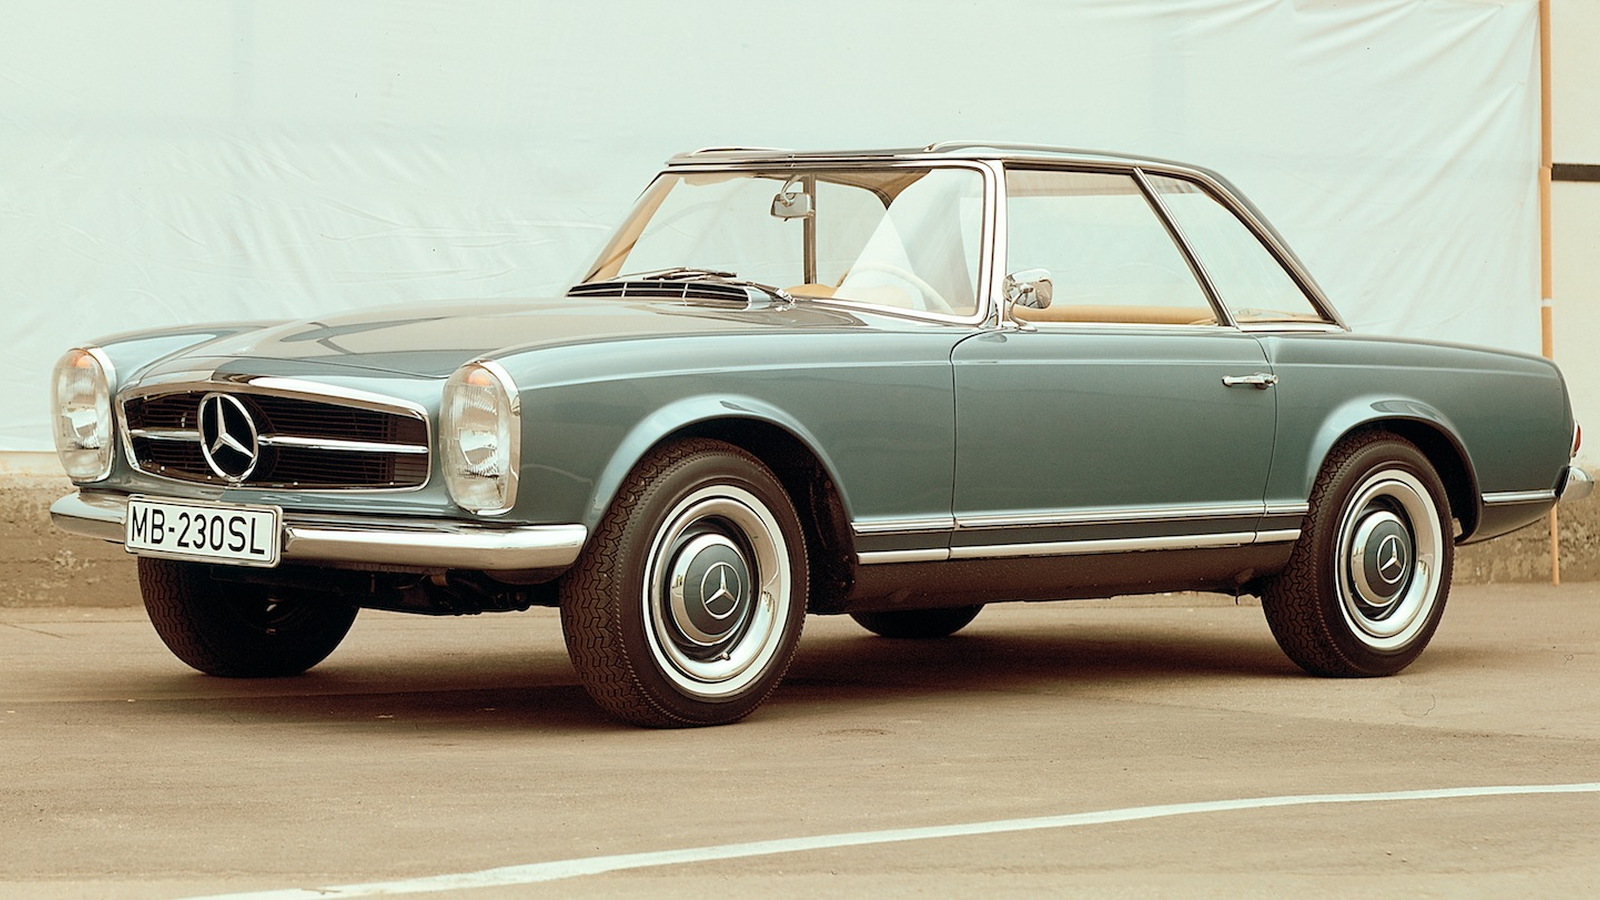 Zolland Design Comes Out With Retro Pagoda Conversion For 5th Gen Mercedes Sl